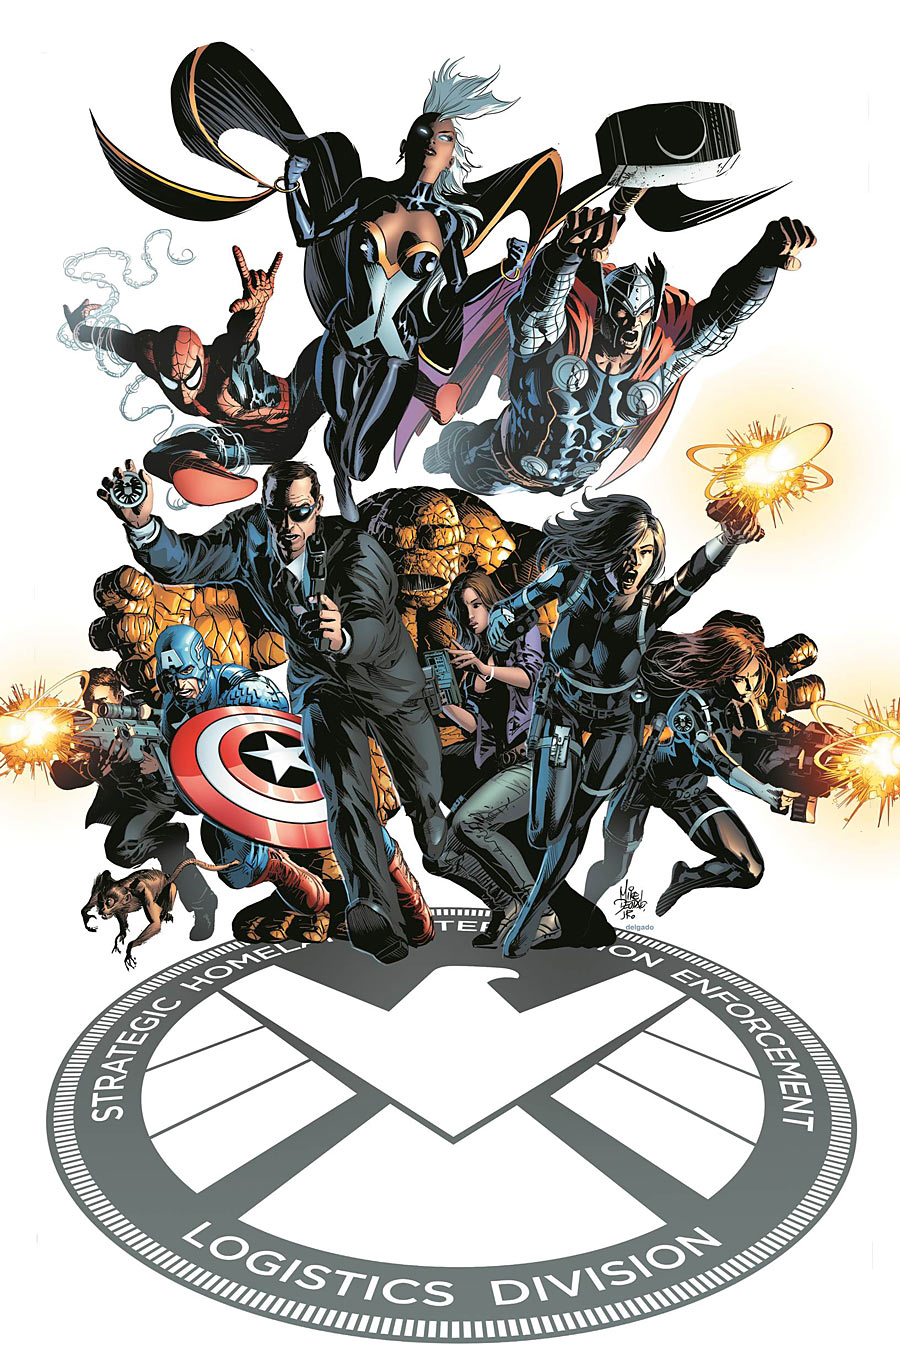 S.H.I.E.L.D. in the Marvel Universe by Mike Deodato. And a monkey.